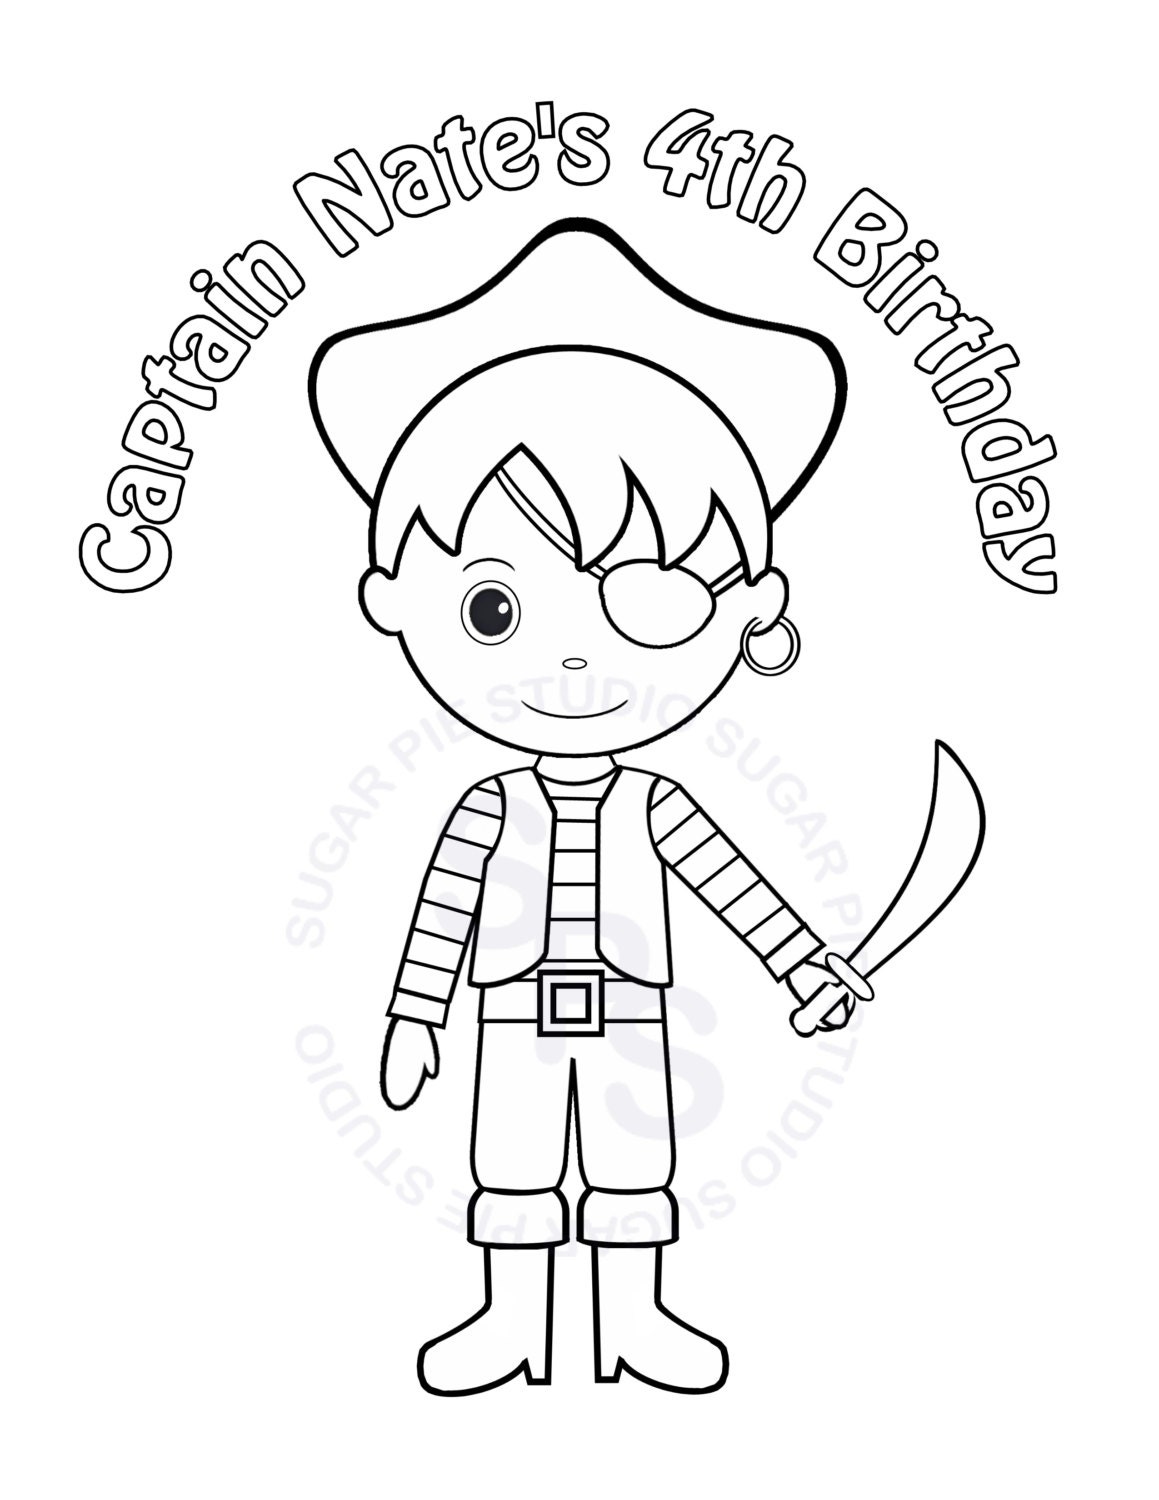 Download Personalized Printable Pirate Birthday Party Favor ...